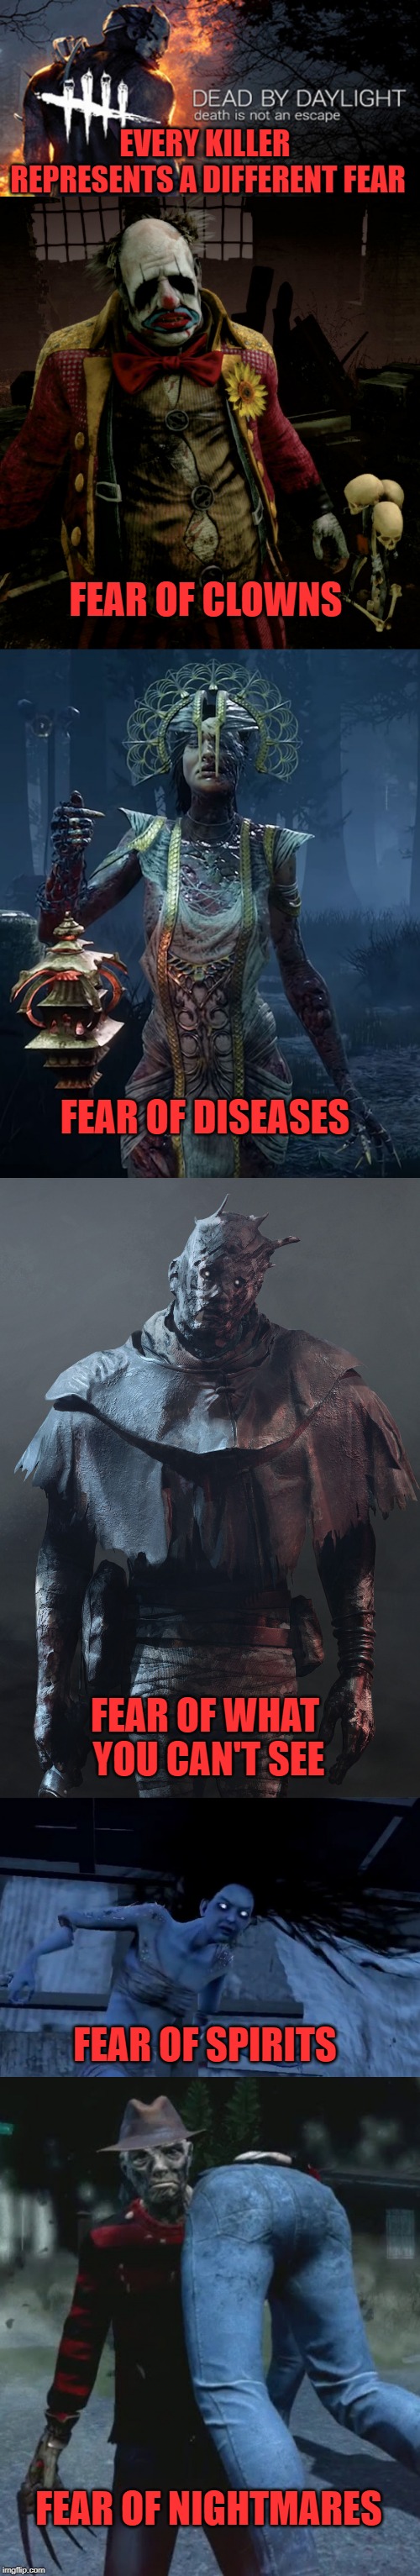 EVERY KILLER REPRESENTS A DIFFERENT FEAR; FEAR OF CLOWNS; FEAR OF DISEASES; FEAR OF WHAT YOU CAN'T SEE; FEAR OF SPIRITS; FEAR OF NIGHTMARES | image tagged in horror movie,fear,video game | made w/ Imgflip meme maker